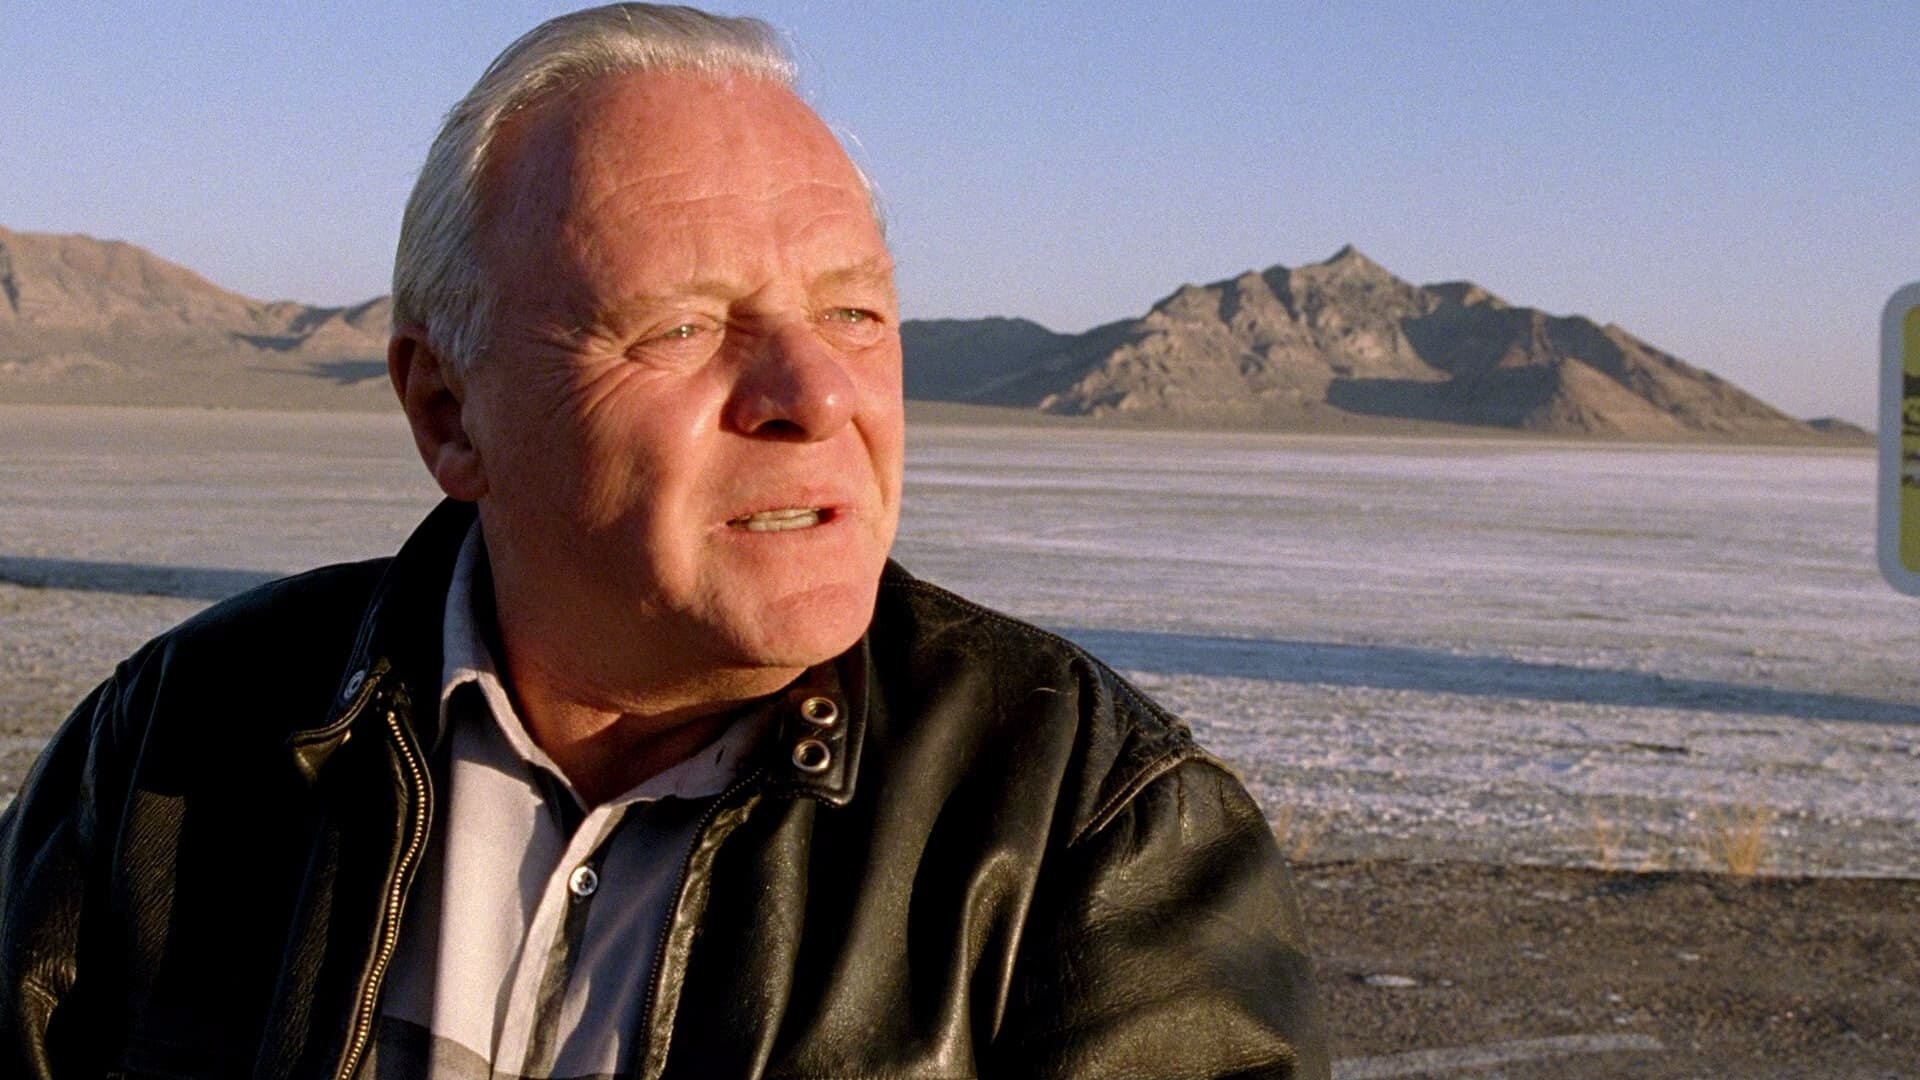 The World's Fastest Indian: Anthony Hopkins as Burt Munro, a motorcycle racer from New Zealand. 1920x1080 Full HD Background.